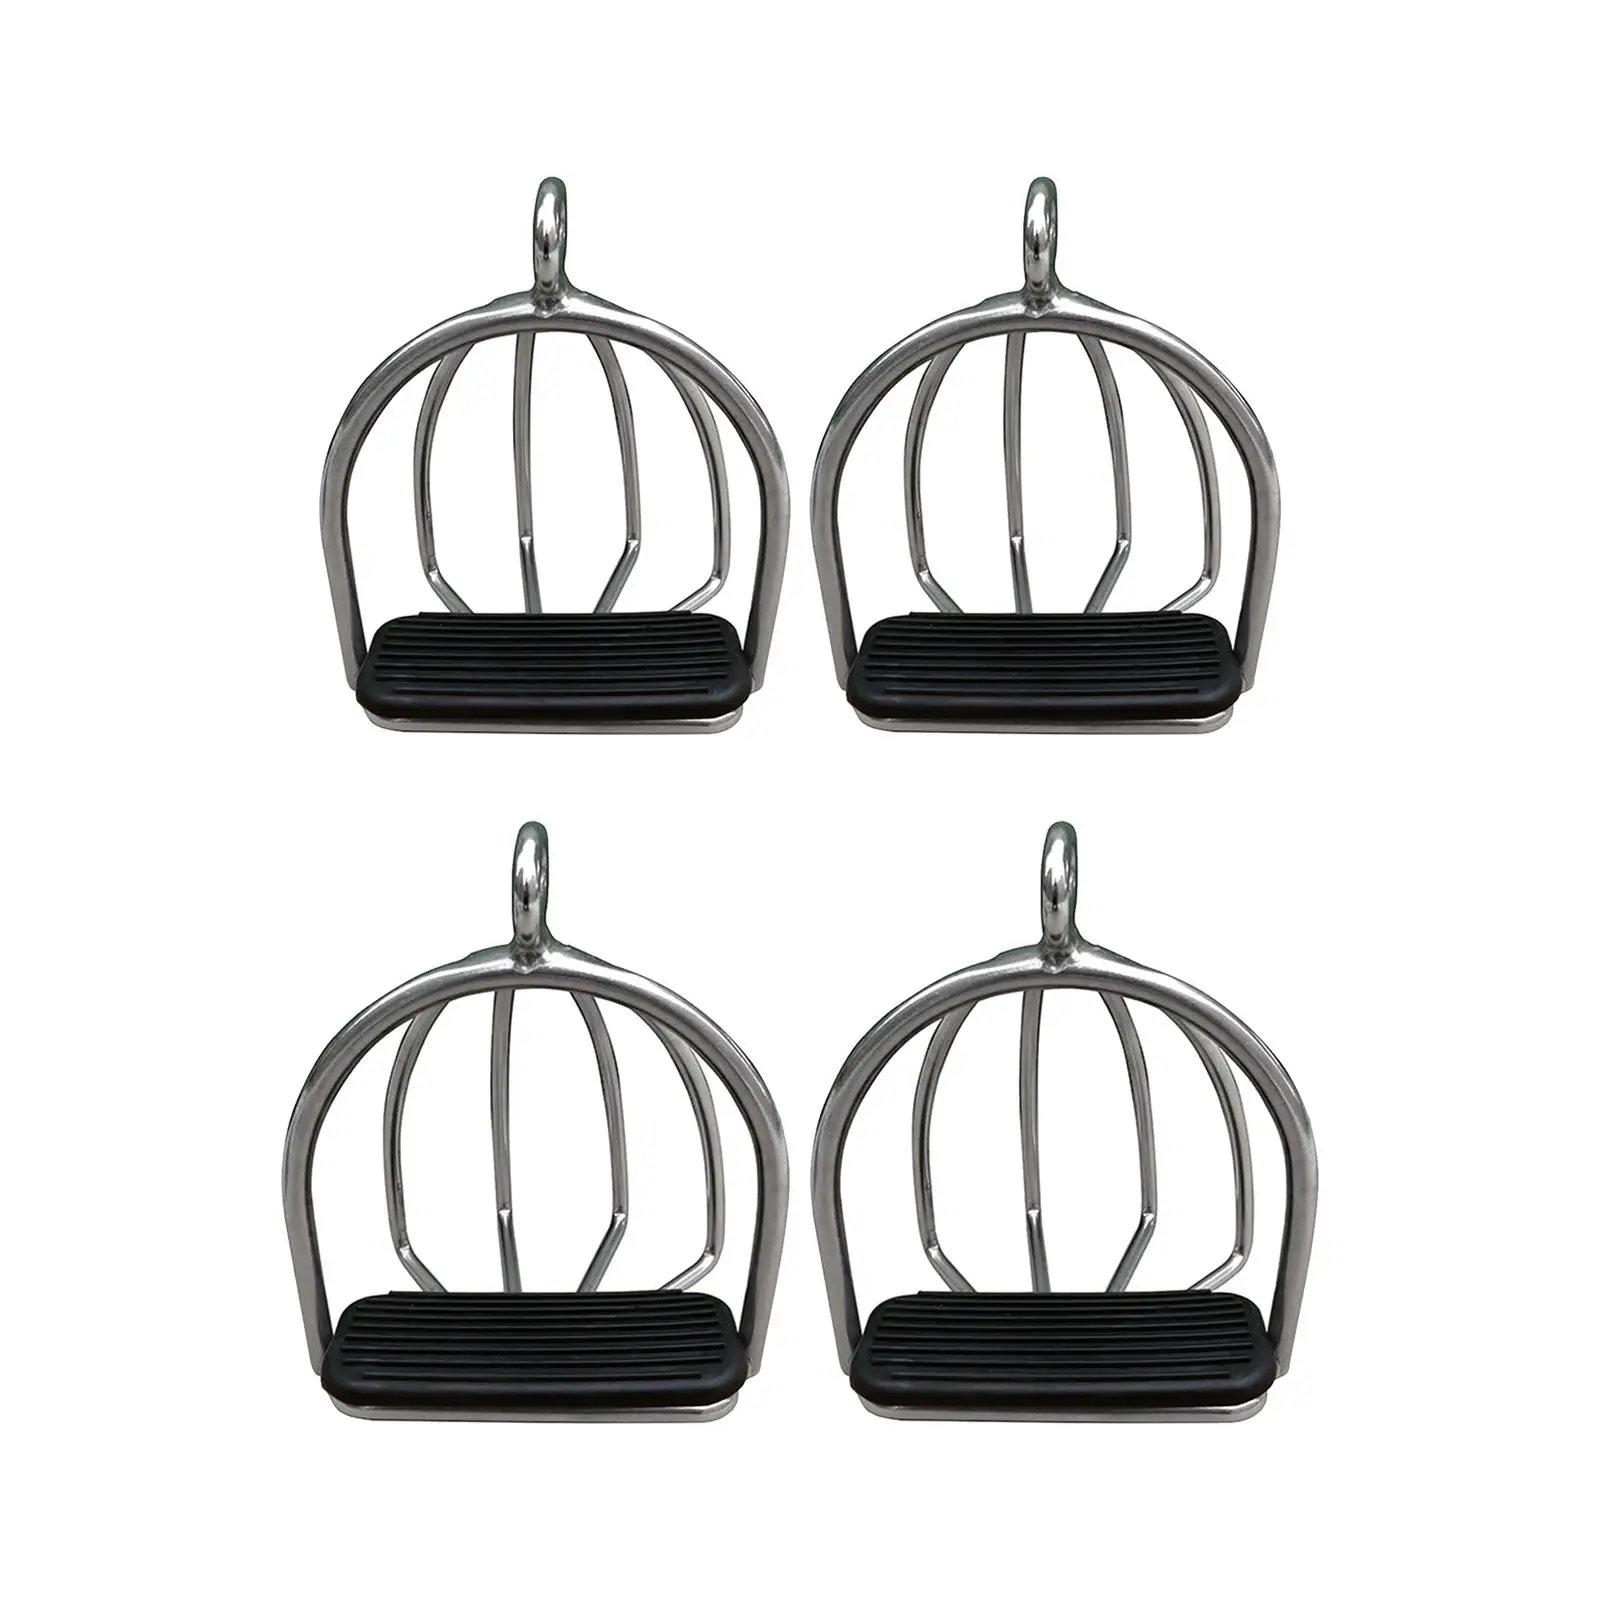 2Pcs Horse Riding Stirrups Anti-Skid Equestrian Lightweight Training Tool for Horse Riding Outdoor Sports Adults Supplies Kids